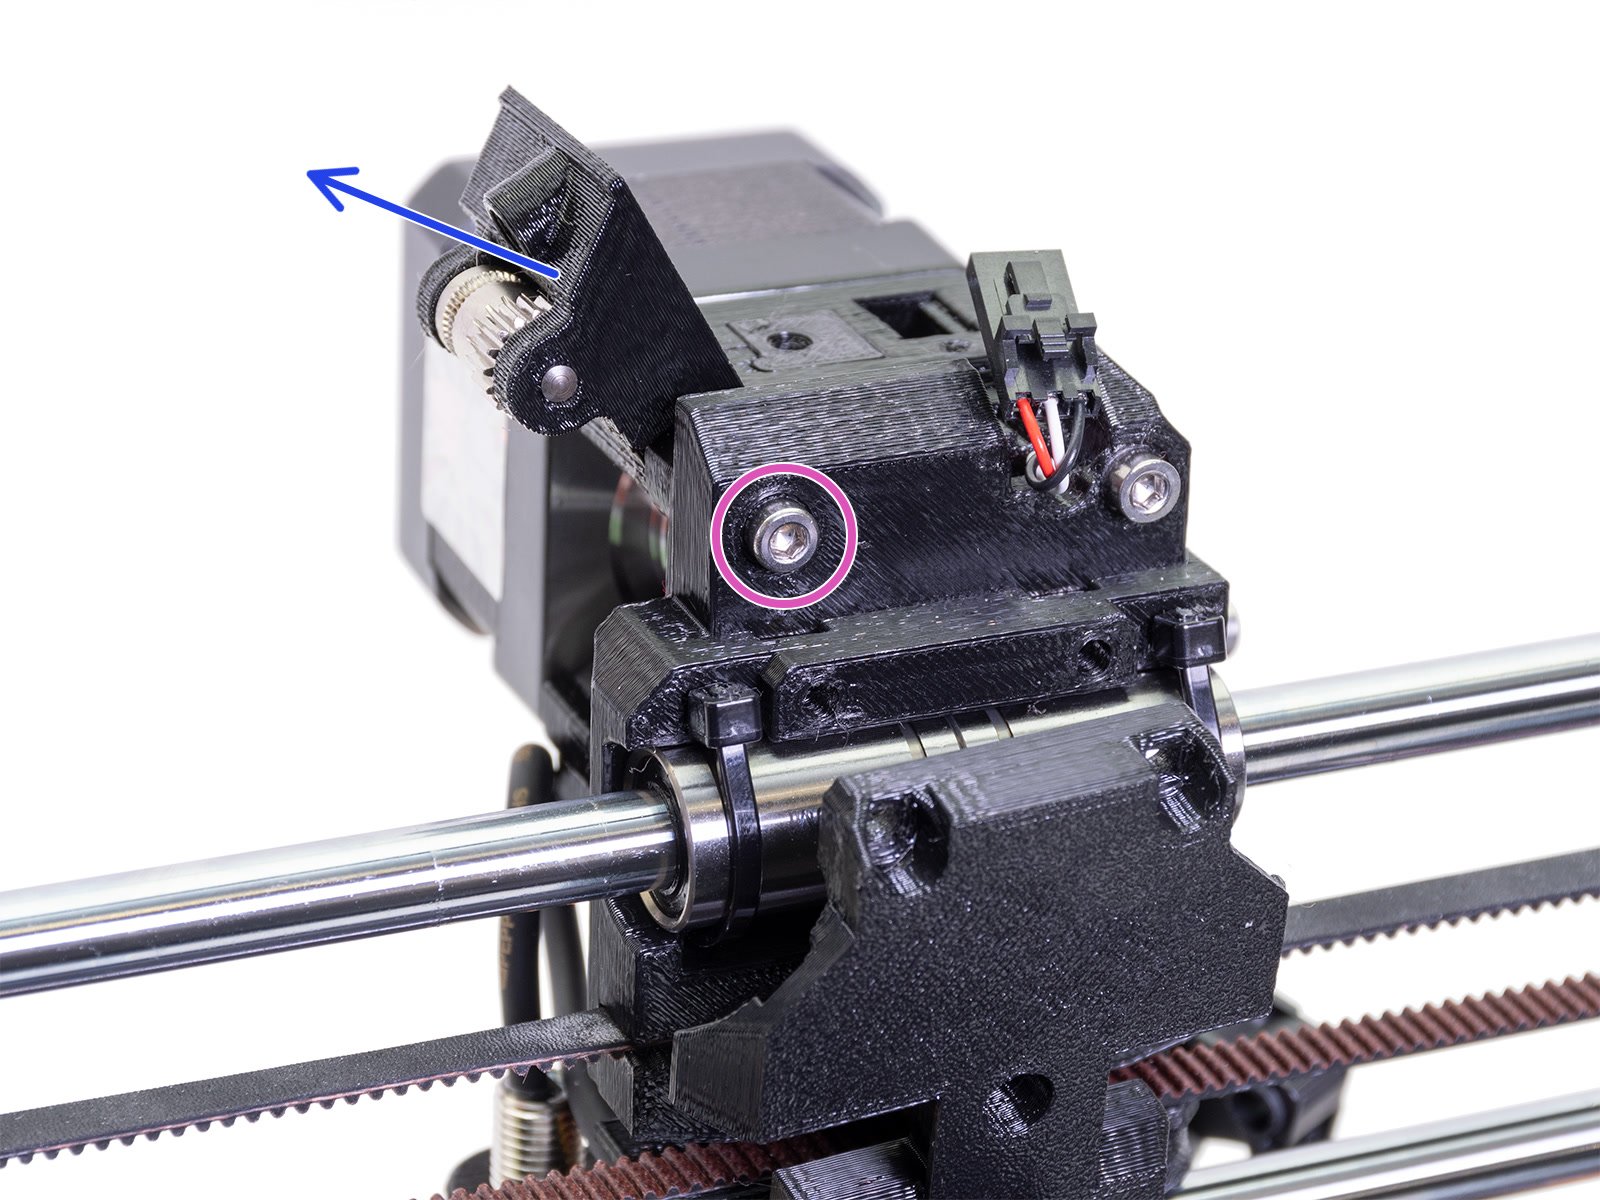 Extruder-body disassembly